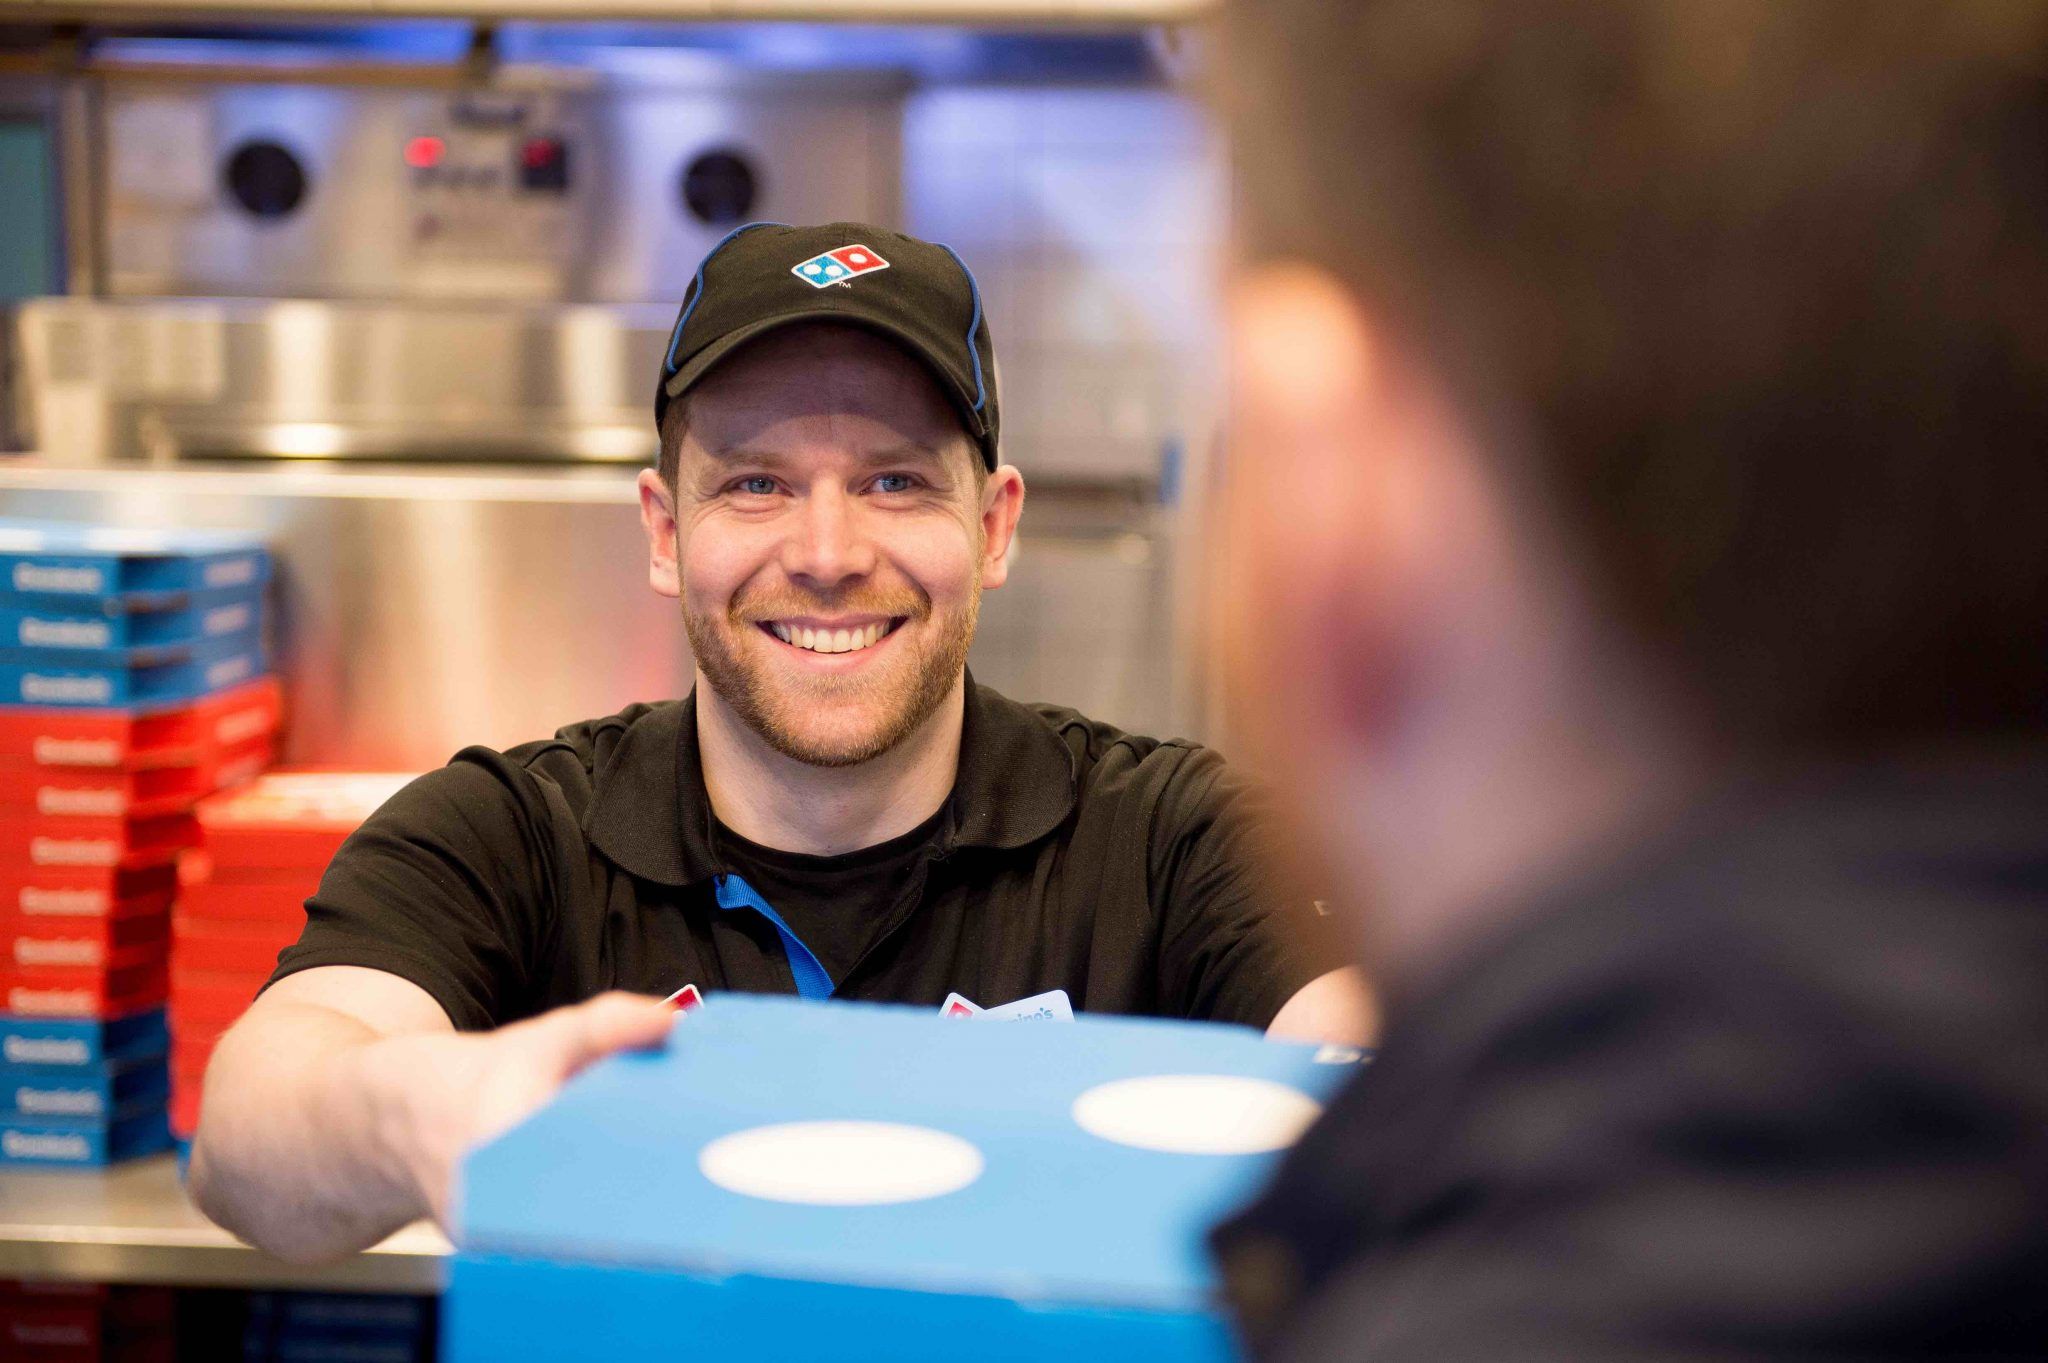 Domino's hiring close to 500 people in Ireland as part of 2020 expansion plans